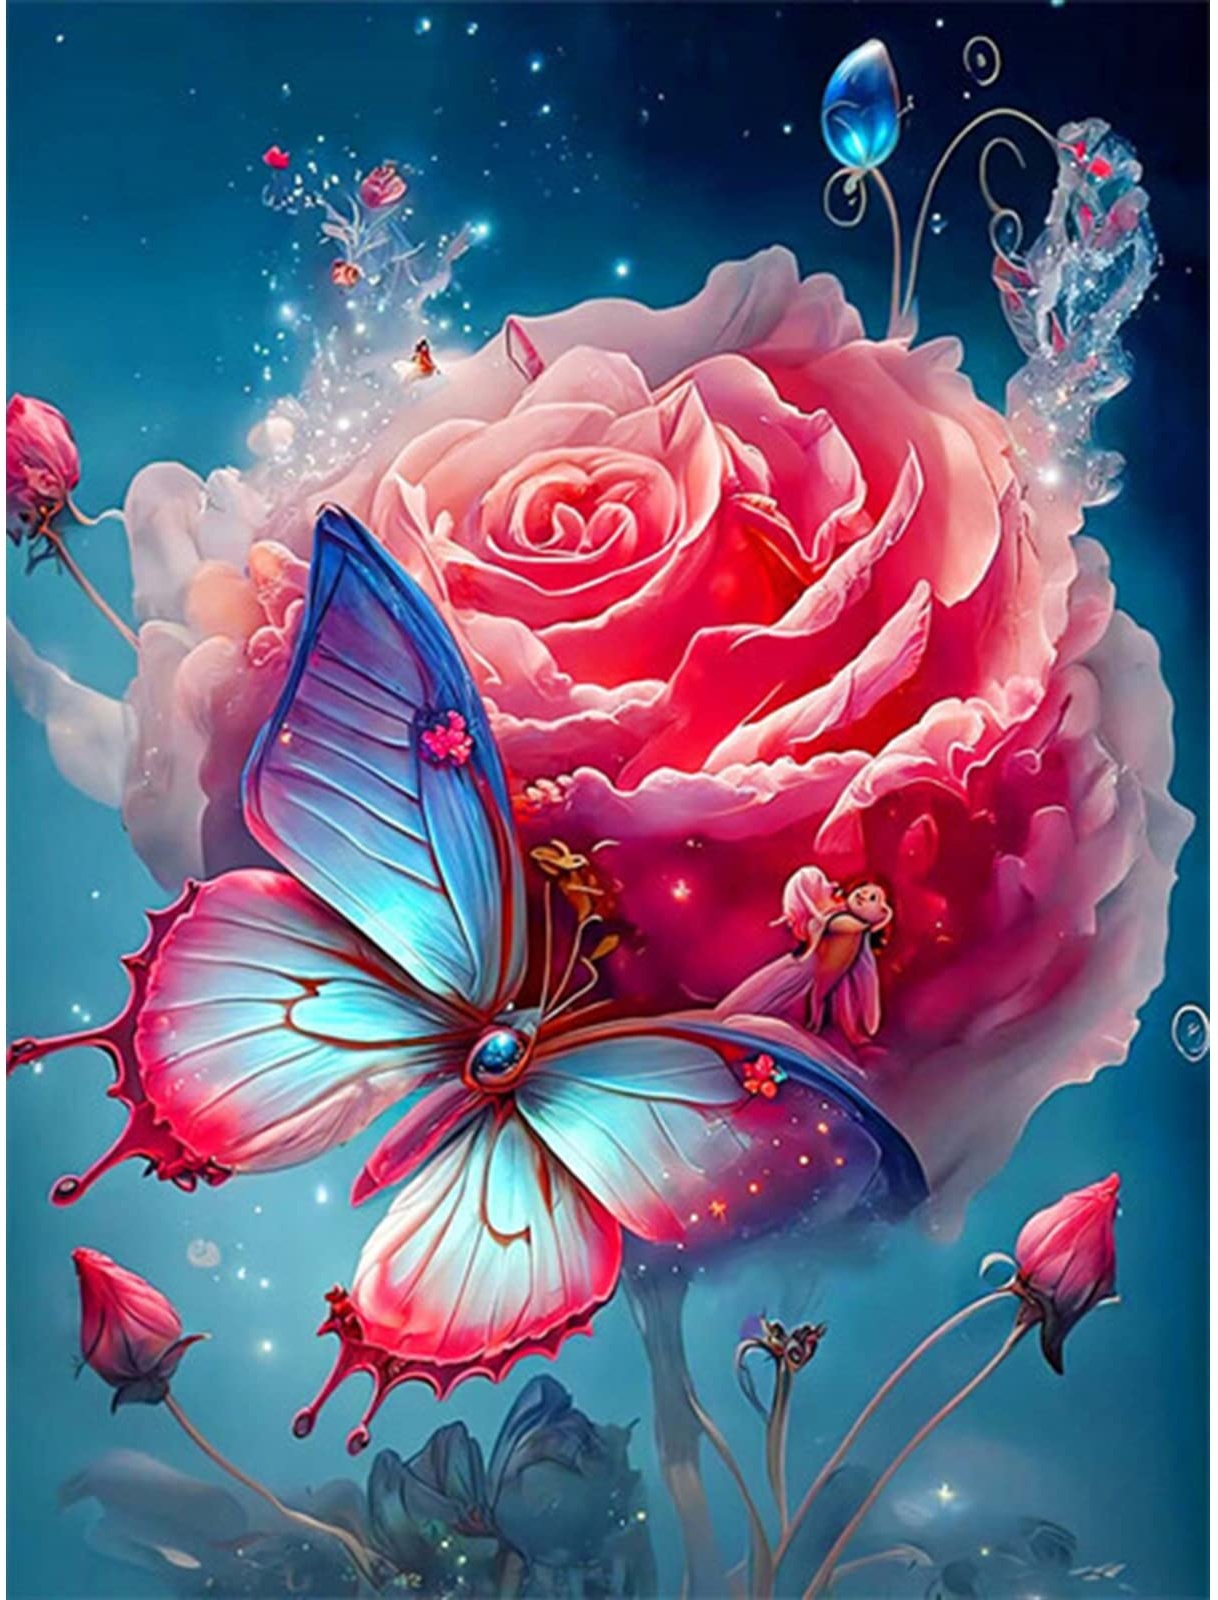 AIRDEA DIY Butterfly Diamond Painting Kits for Adults Beginners Round Full Drill 5D Butterfly Diamond Art Kits for Kids Flowers Diamond Painting by Number Kits Fantasy Gem Painting Art 12x16 inch